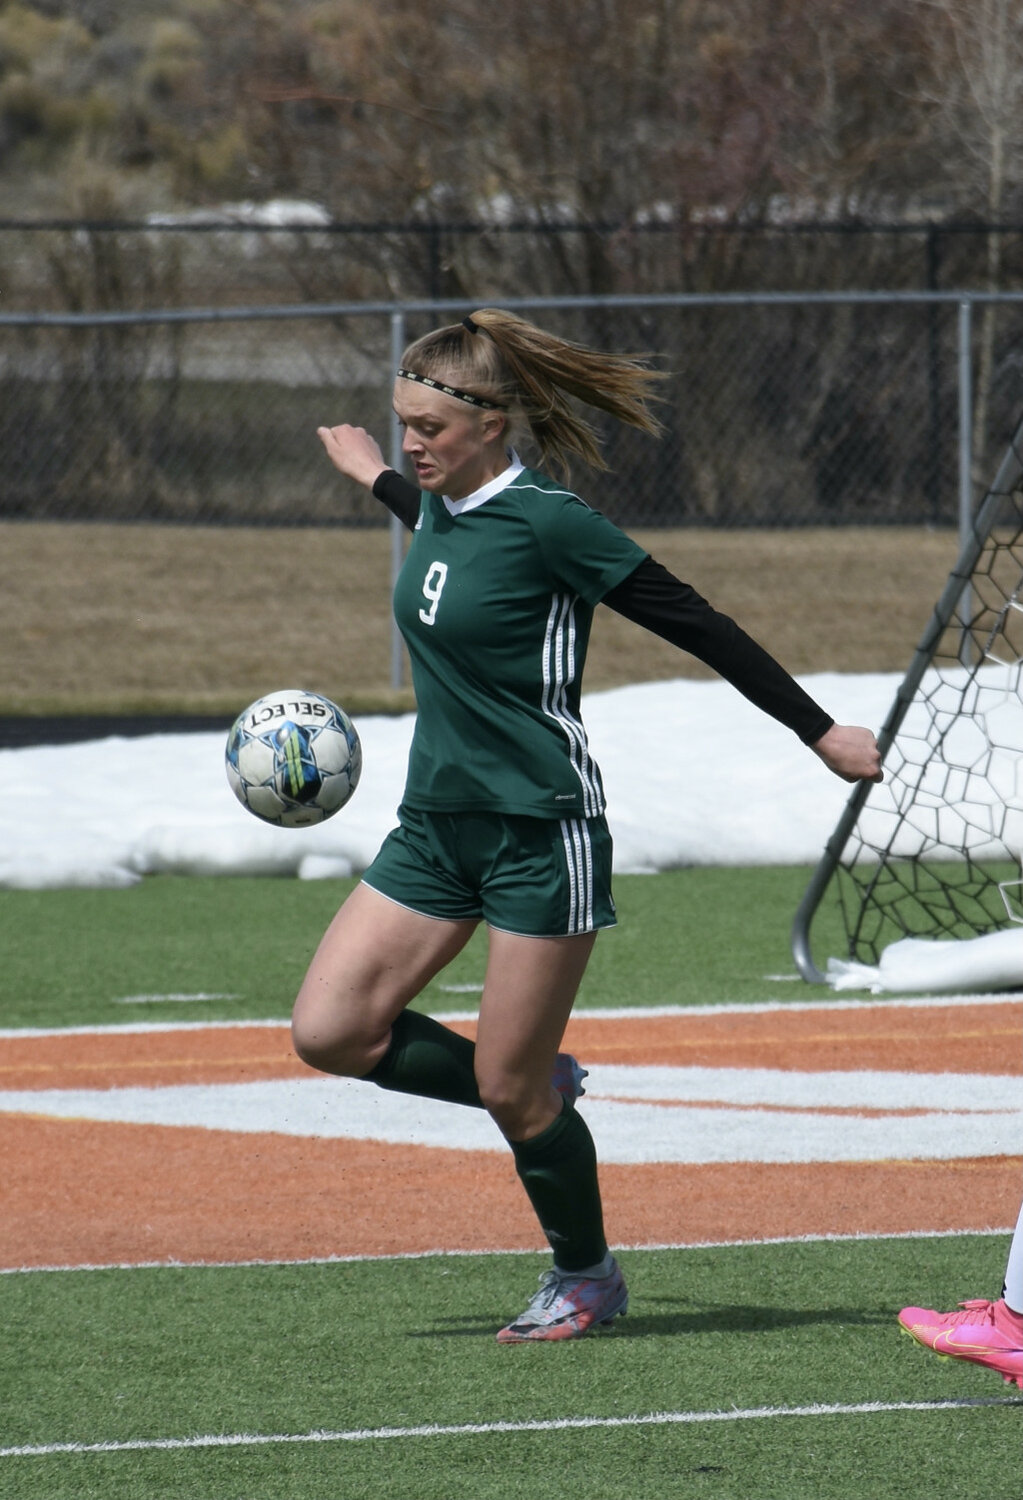 Robert Galbreath photo
Sophomore Cora Koci maneuvers the ball away from Pinedale’s goal area during the April 27 varsity game against Lander.